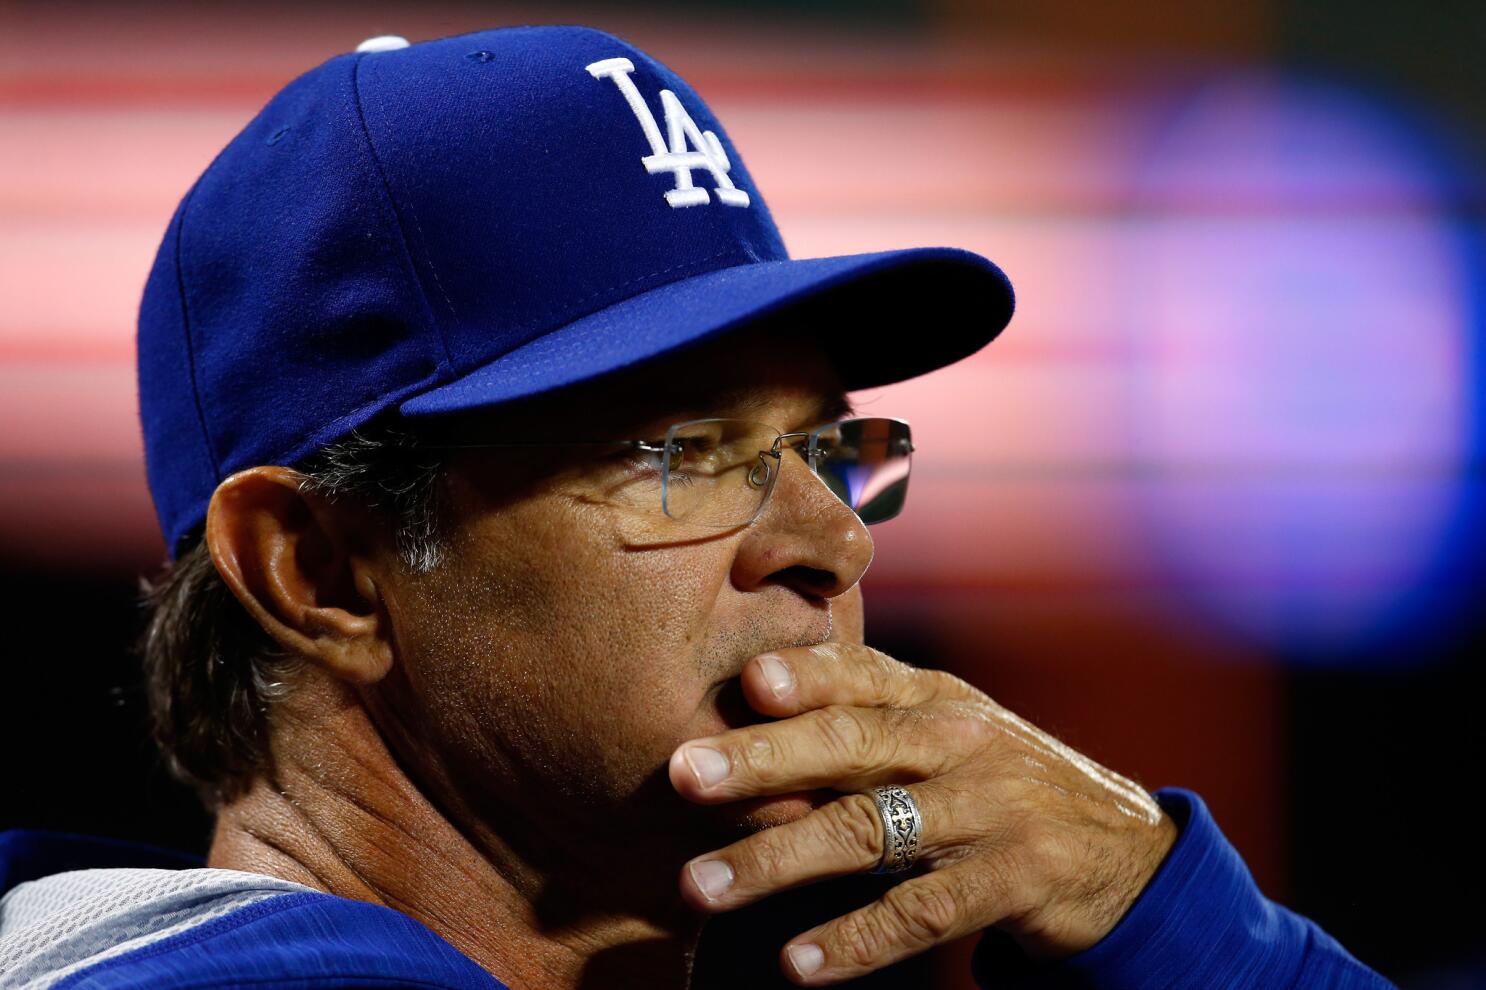 Report: Blue Jays in talks with Don Mattingly to join coaching staff